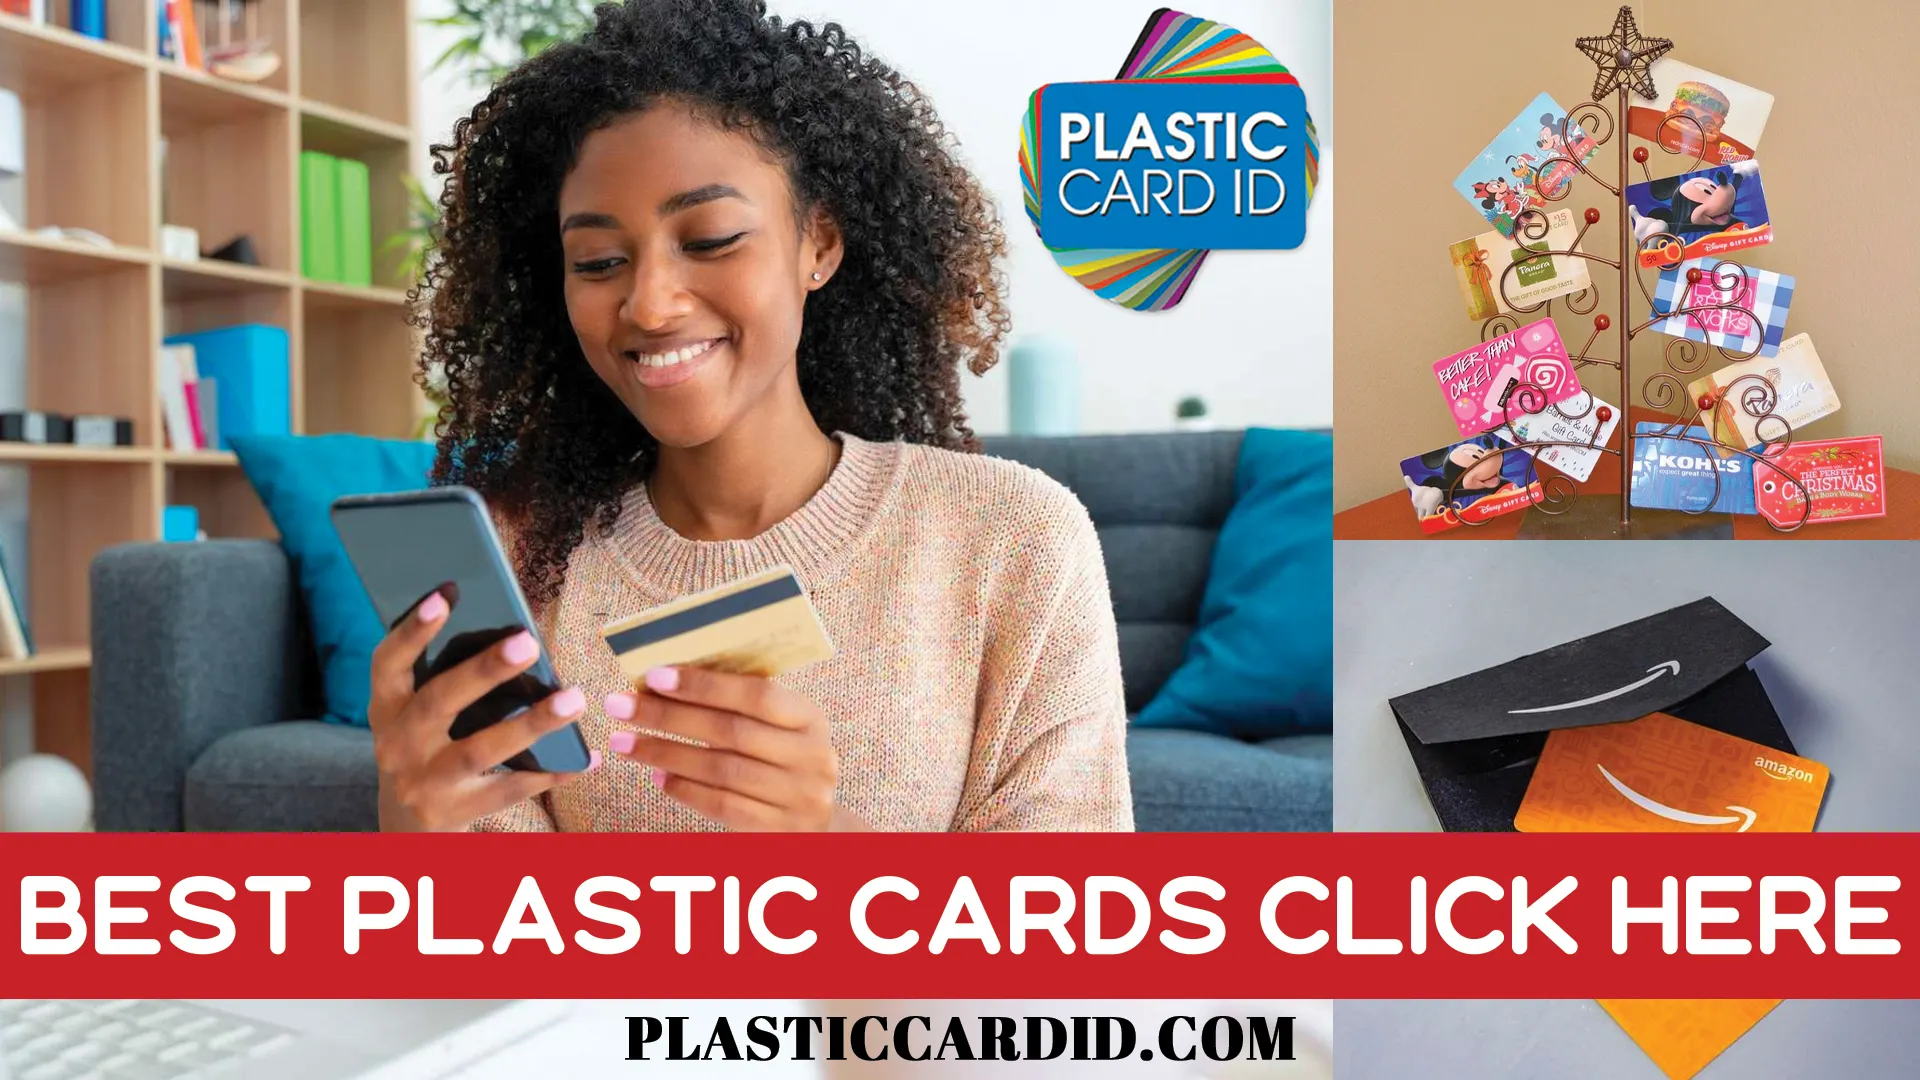 Maintenance and Care for Your Card Printer with Plastic Card ID




